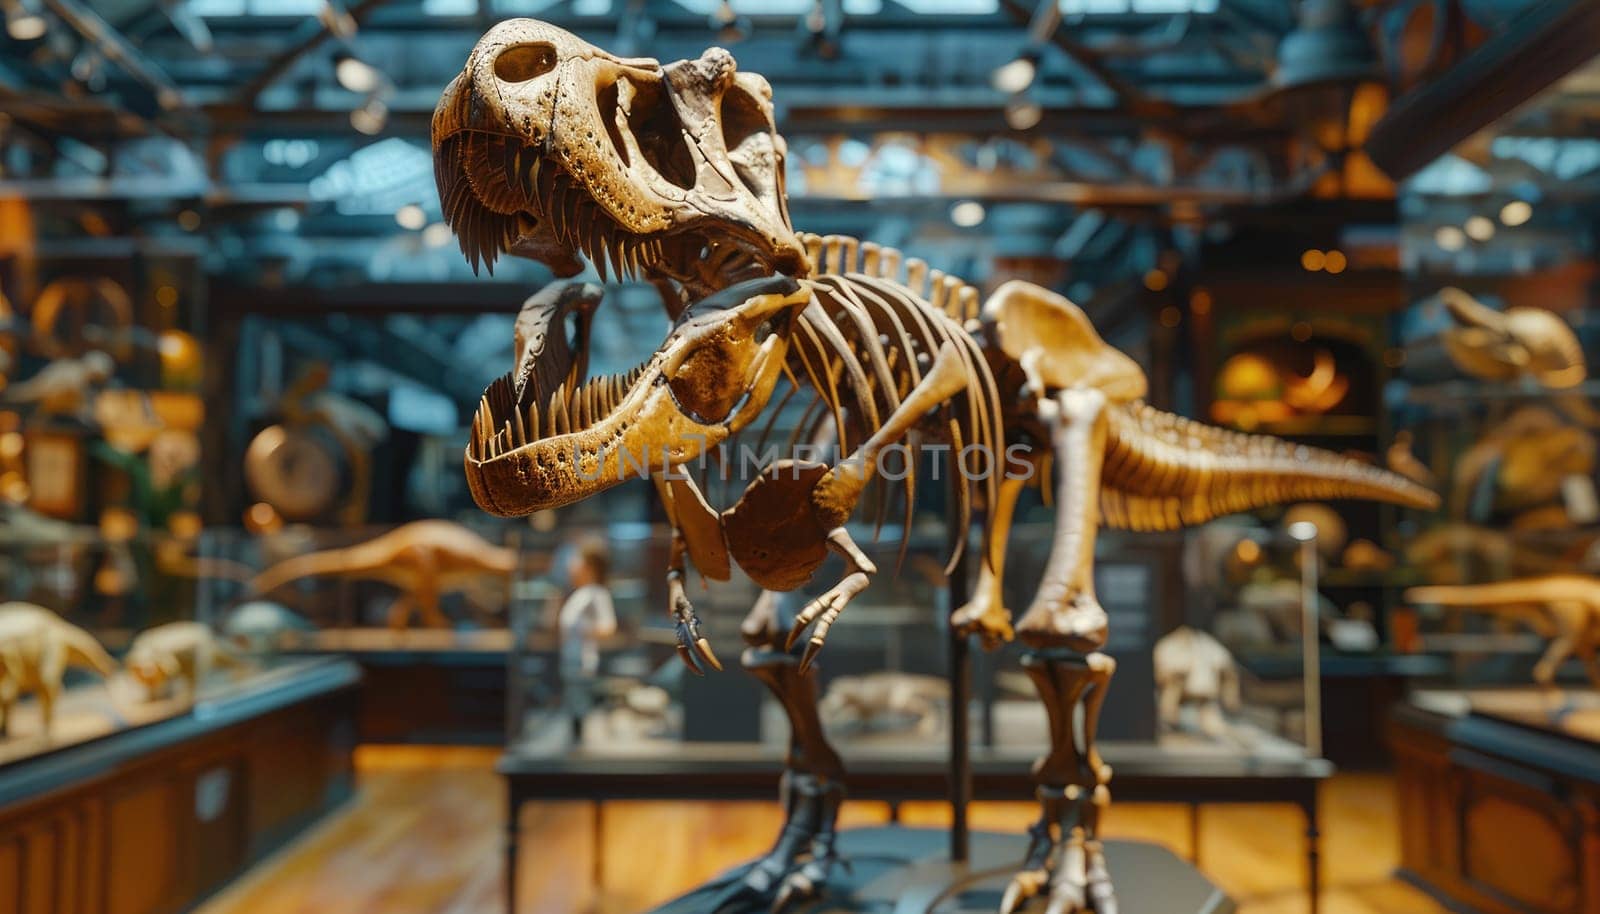 A skeleton of a dinosaur is on display in a museum by AI generated image.